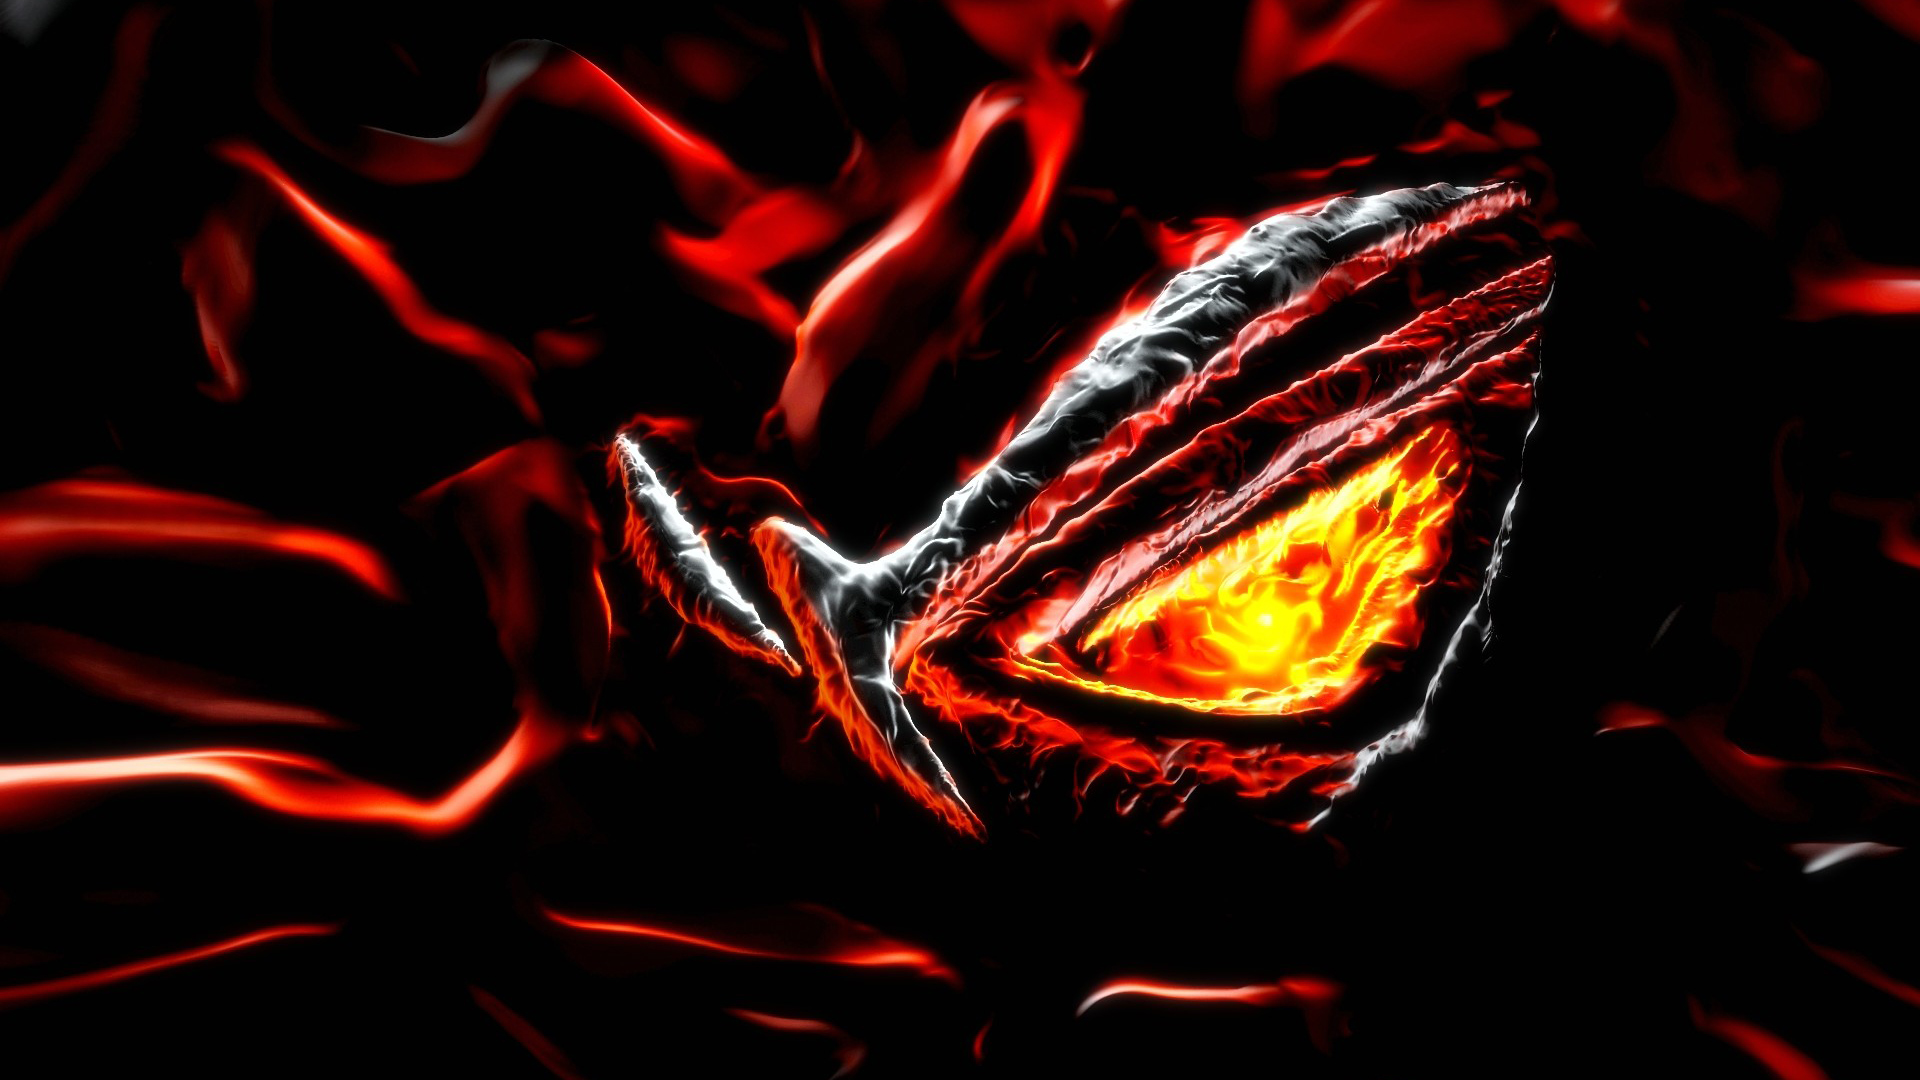 asus rog republic of gamers logo melting in flame hd 1920x1080 1920x1080